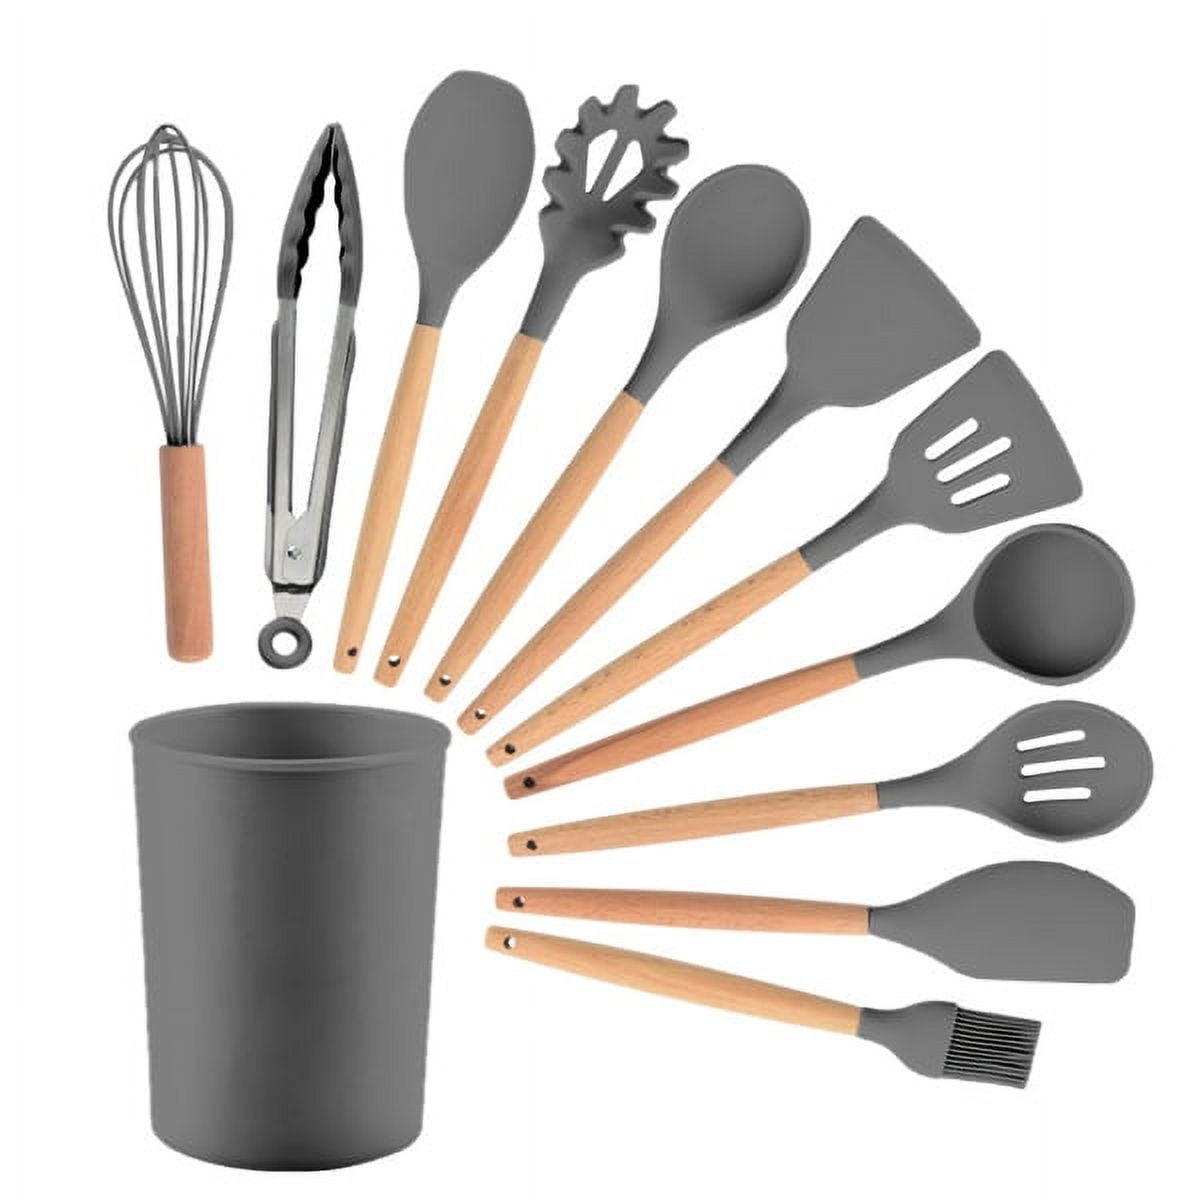 NCUE Cooking Utensils Set, 28 Pcs Silicone Kitchen Utensils Set with  Holder, Silicone Whisk, Spatula…See more NCUE Cooking Utensils Set, 28 Pcs